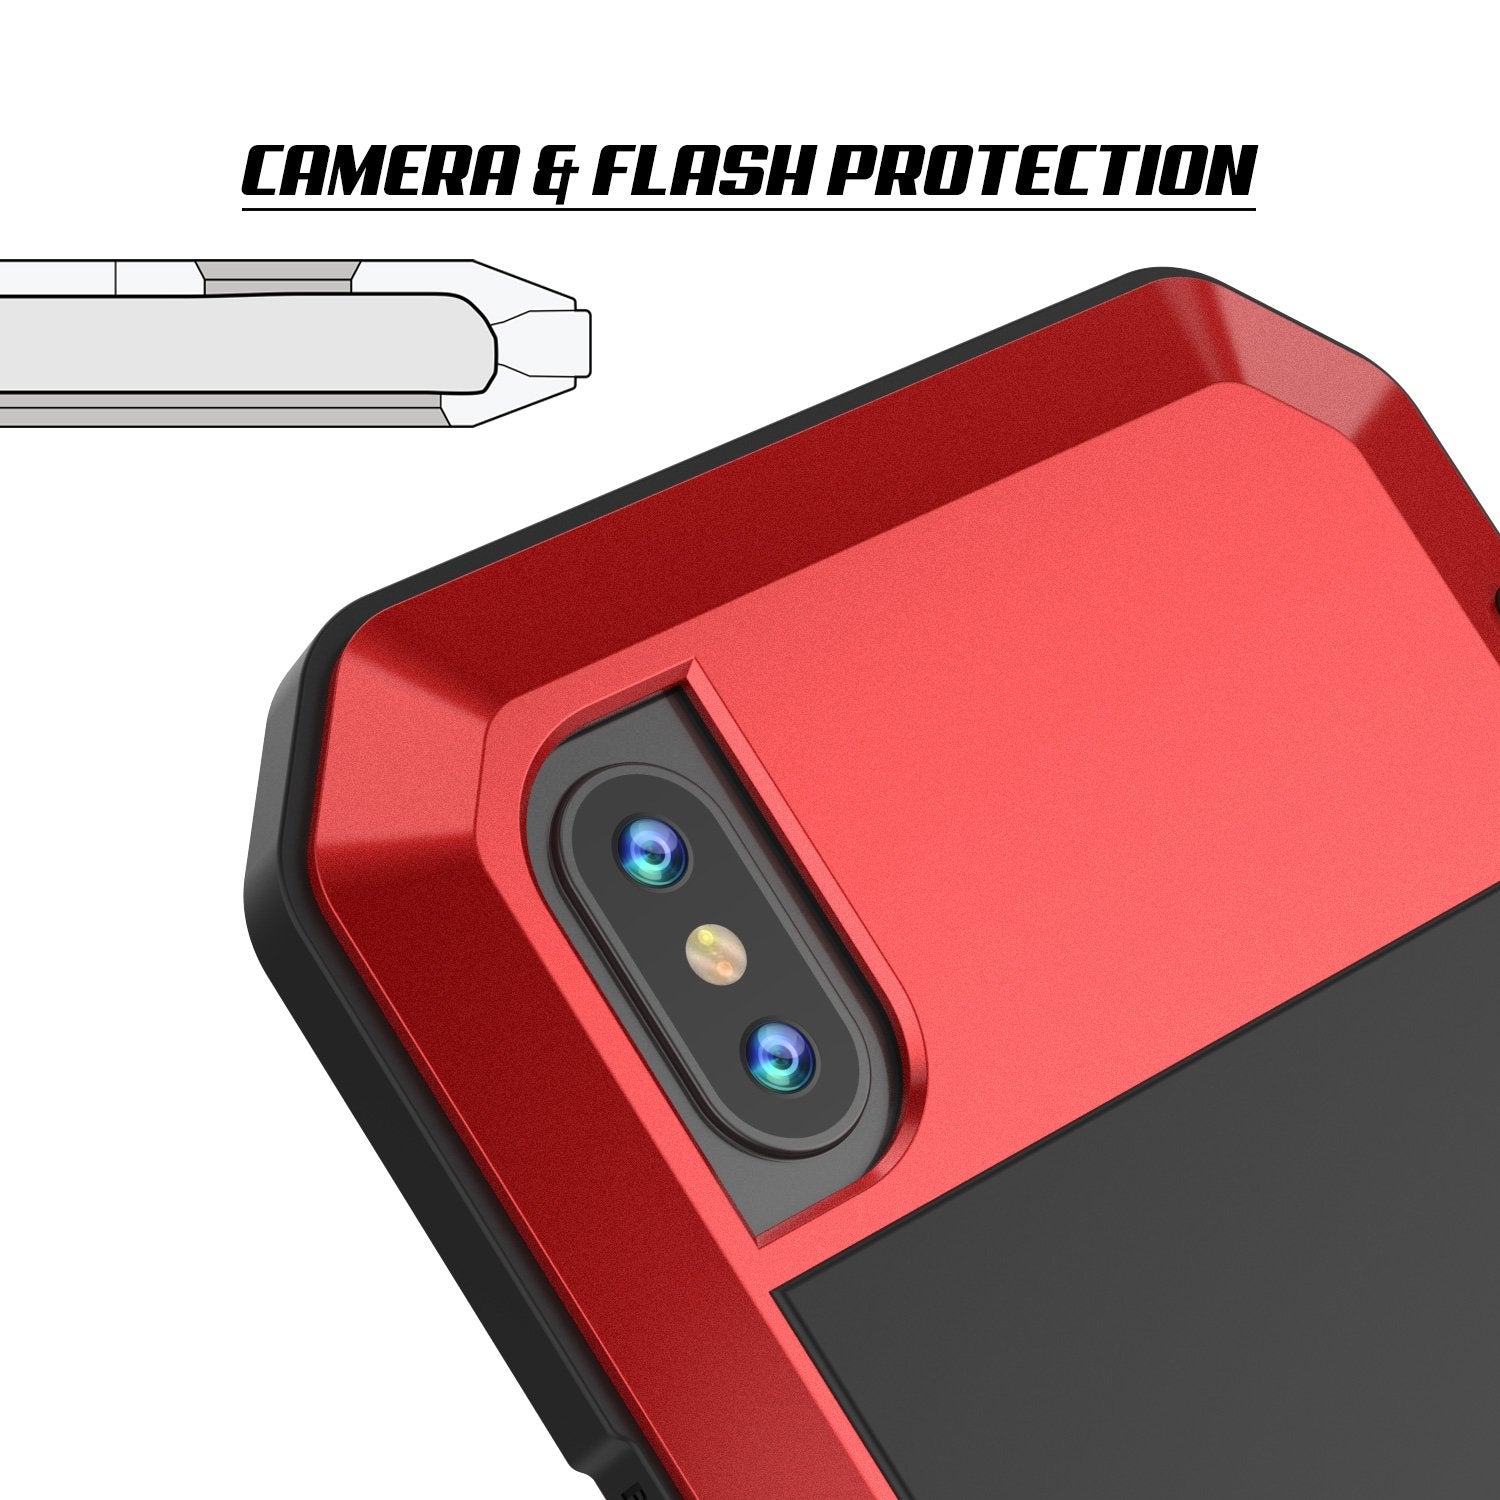 iPhone X Metal Case, Heavy Duty Military Grade Rugged Armor Cover [shock proof] Hybrid Full Body Hard Aluminum & TPU Design [non slip] W/ Prime Drop Protection for Apple iPhone 10 [Red]